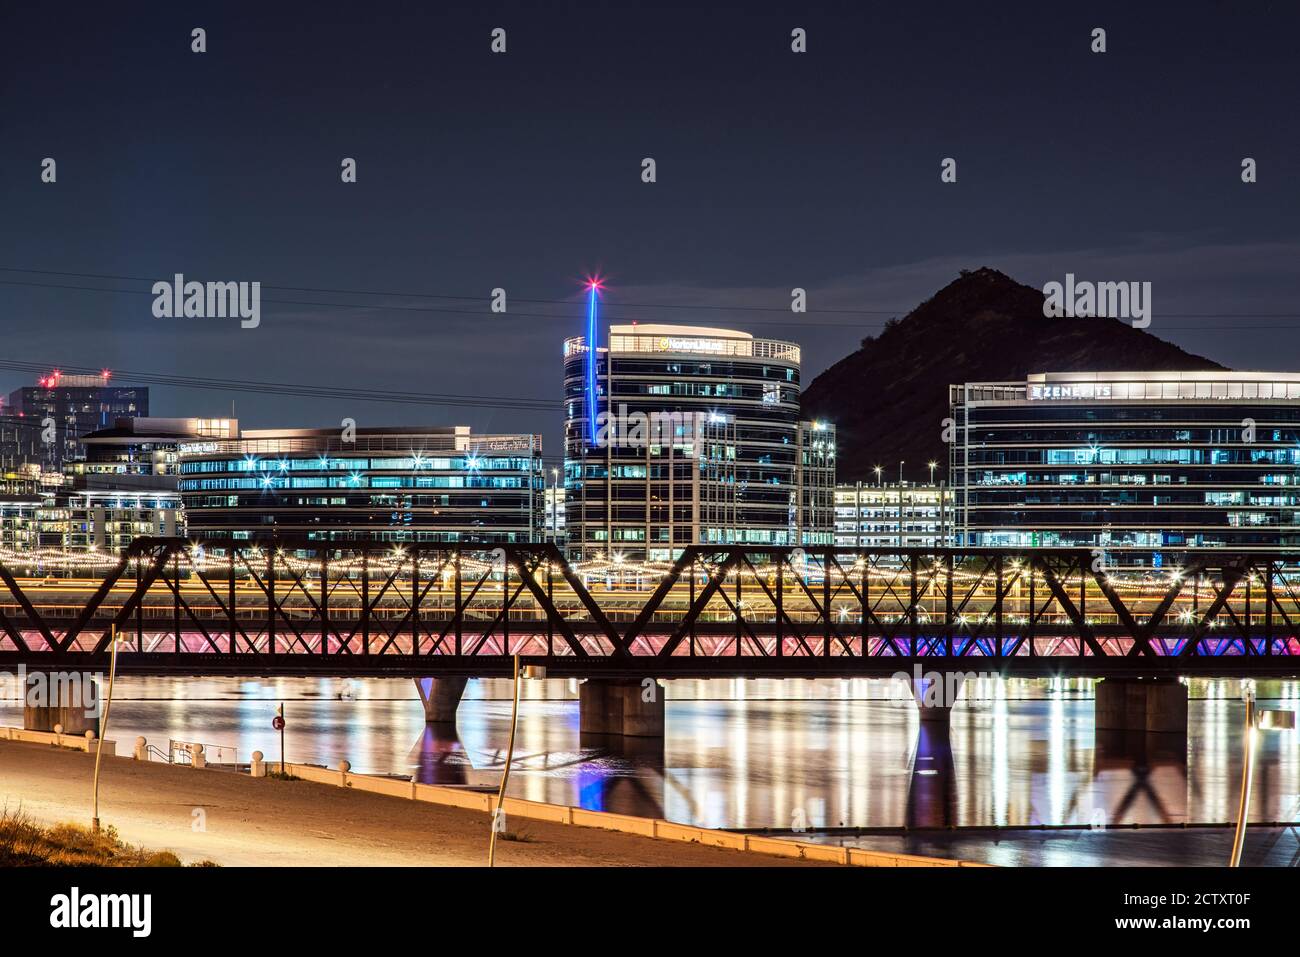 Evening view of the four bridges crossing Tempe Town Lake in Tempe Arizona. Stock Photo